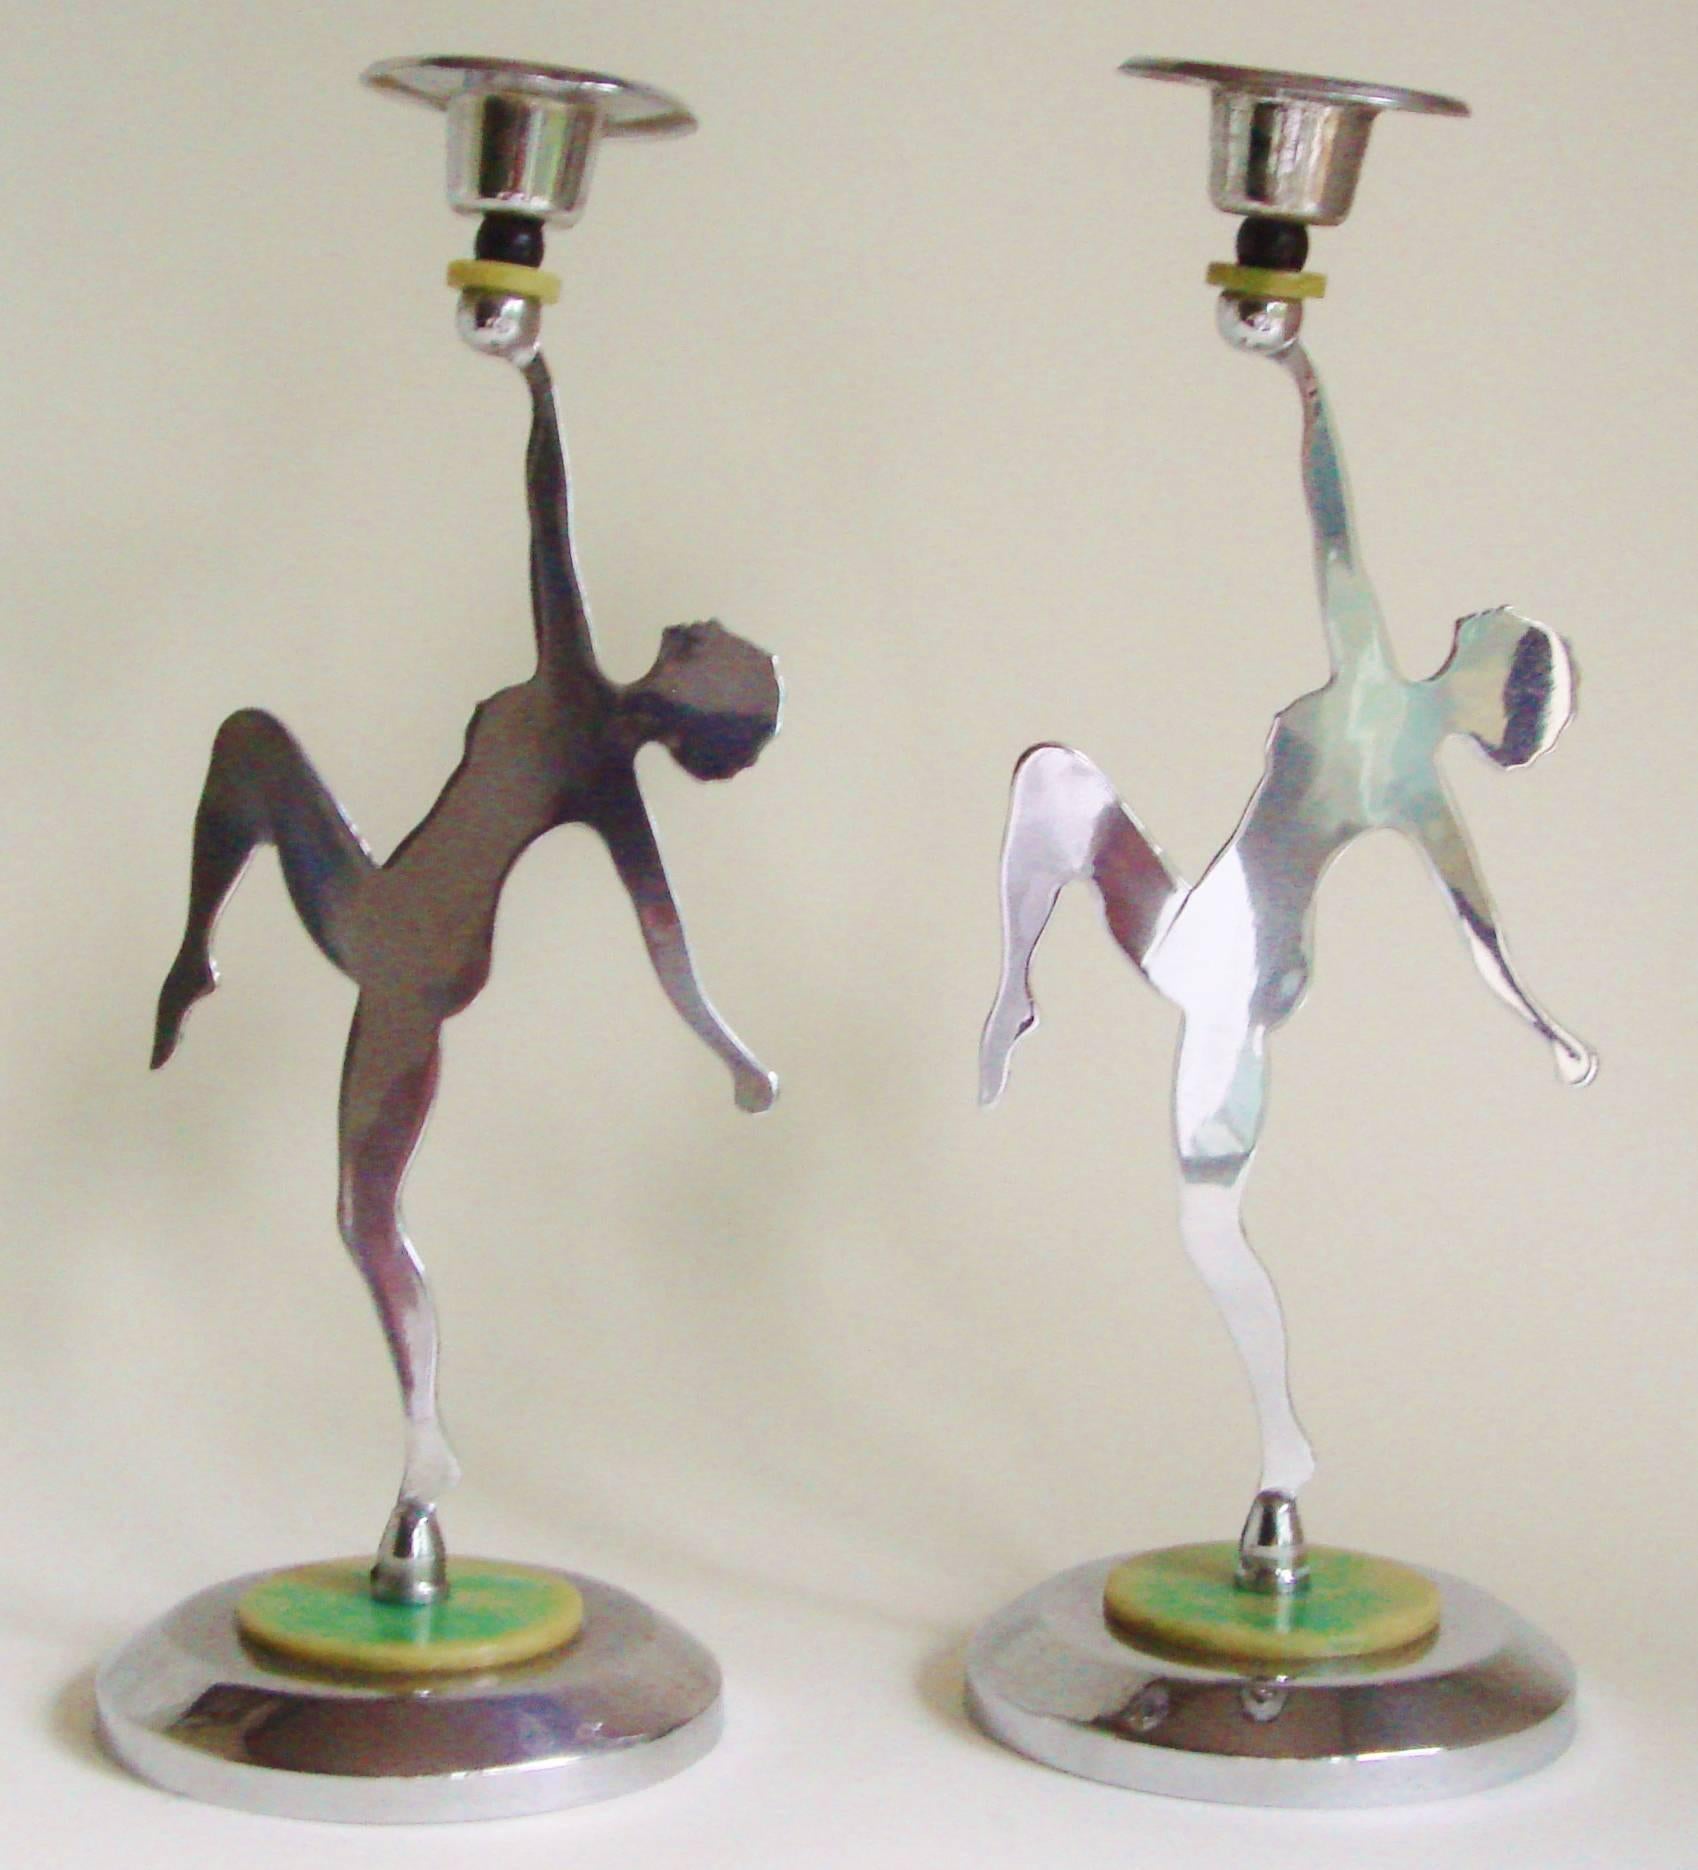 Molded Pair of English Art Deco Chrome Figural Nude Candlesticks with Bakelite Accents For Sale